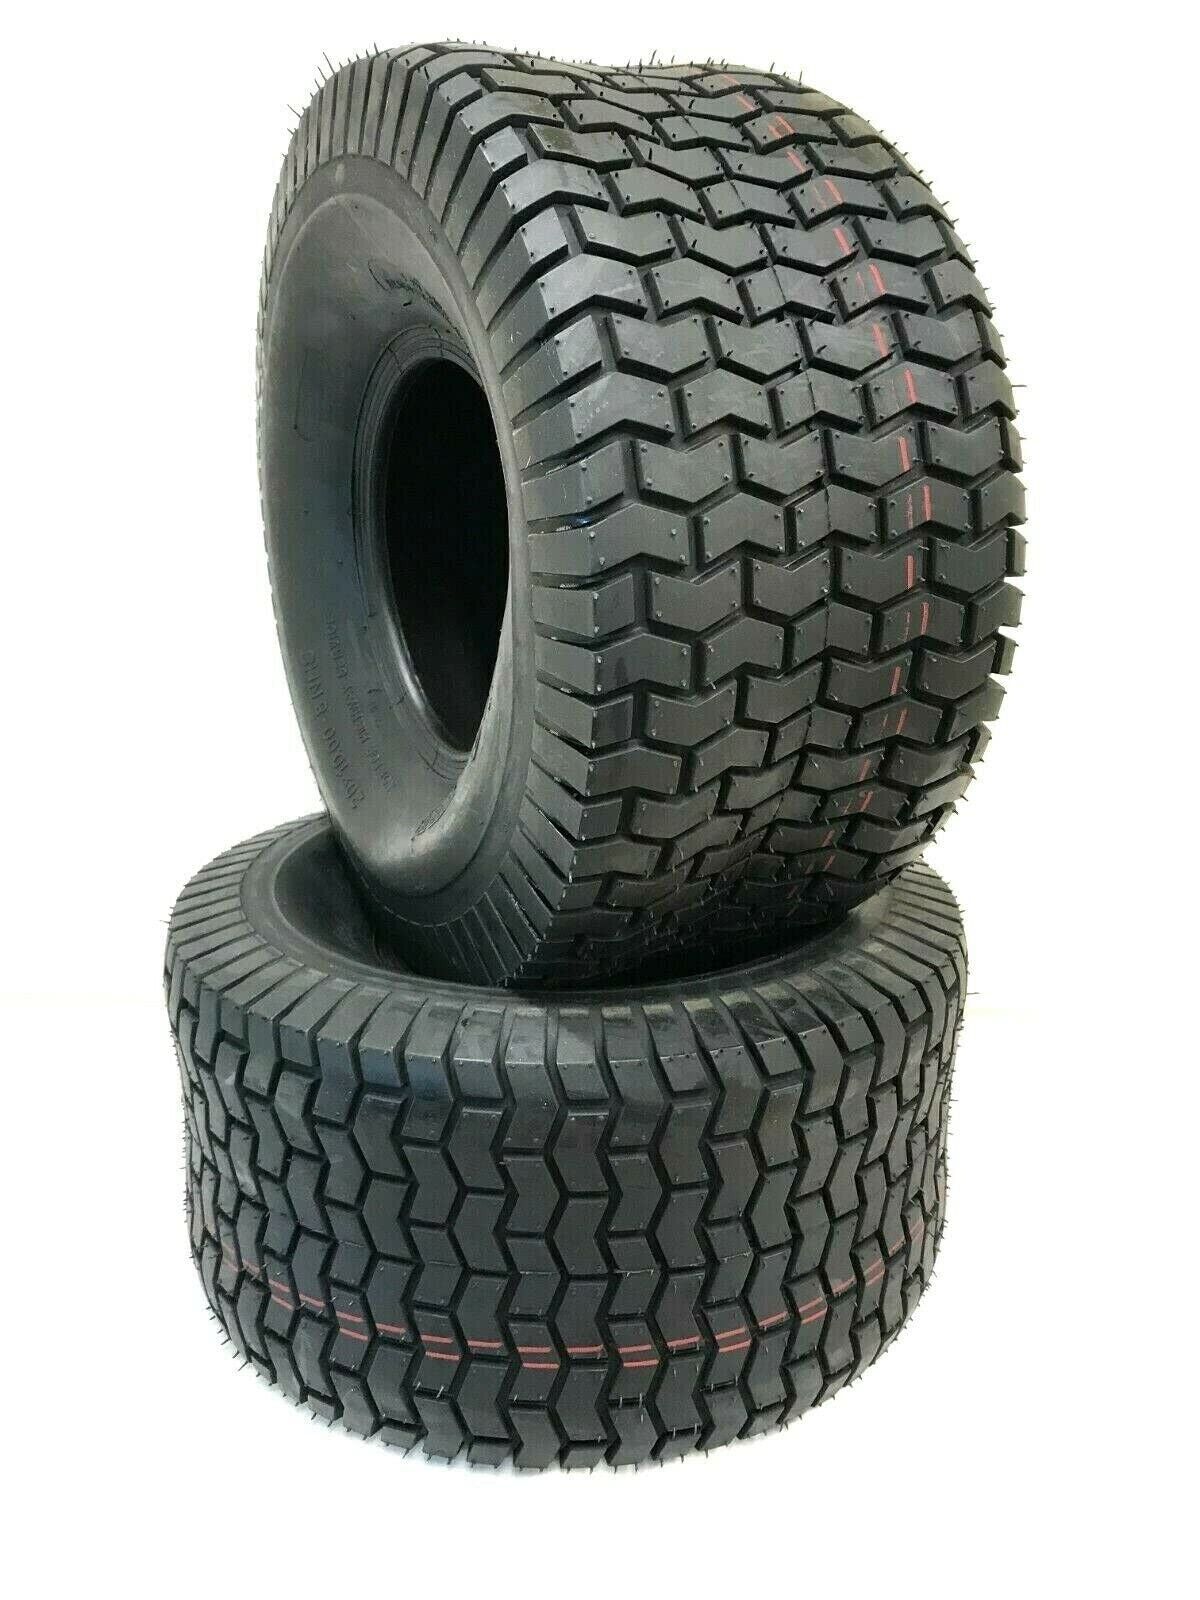 TWO 20X10.00-8 Mower Turf Lawn 20X10-8 4 Ply Rated Lawn Mower Set Two Tires